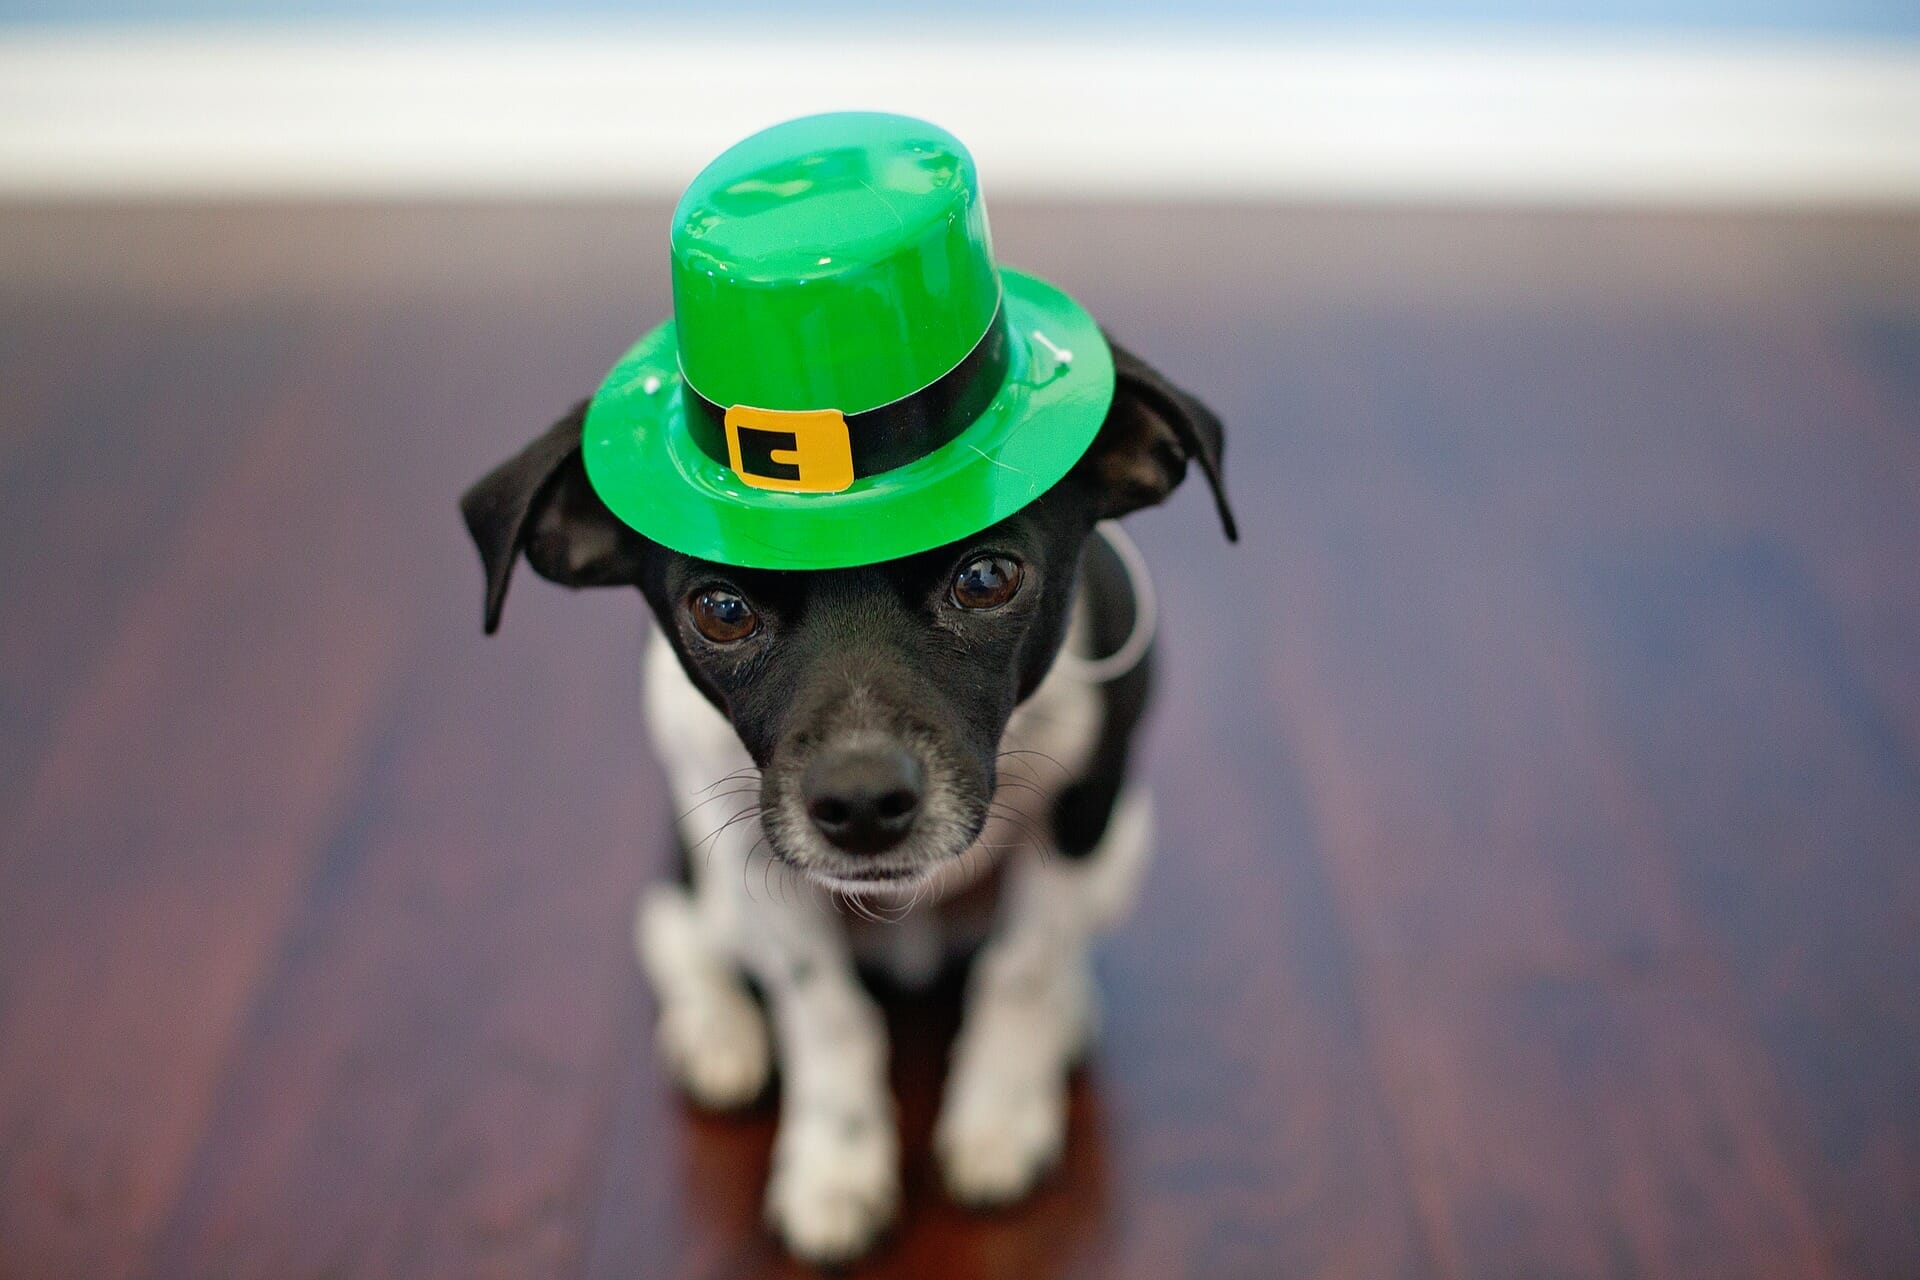 Feeling Lucky? Check Out One of These Big Island St. Patrick’s Day Events